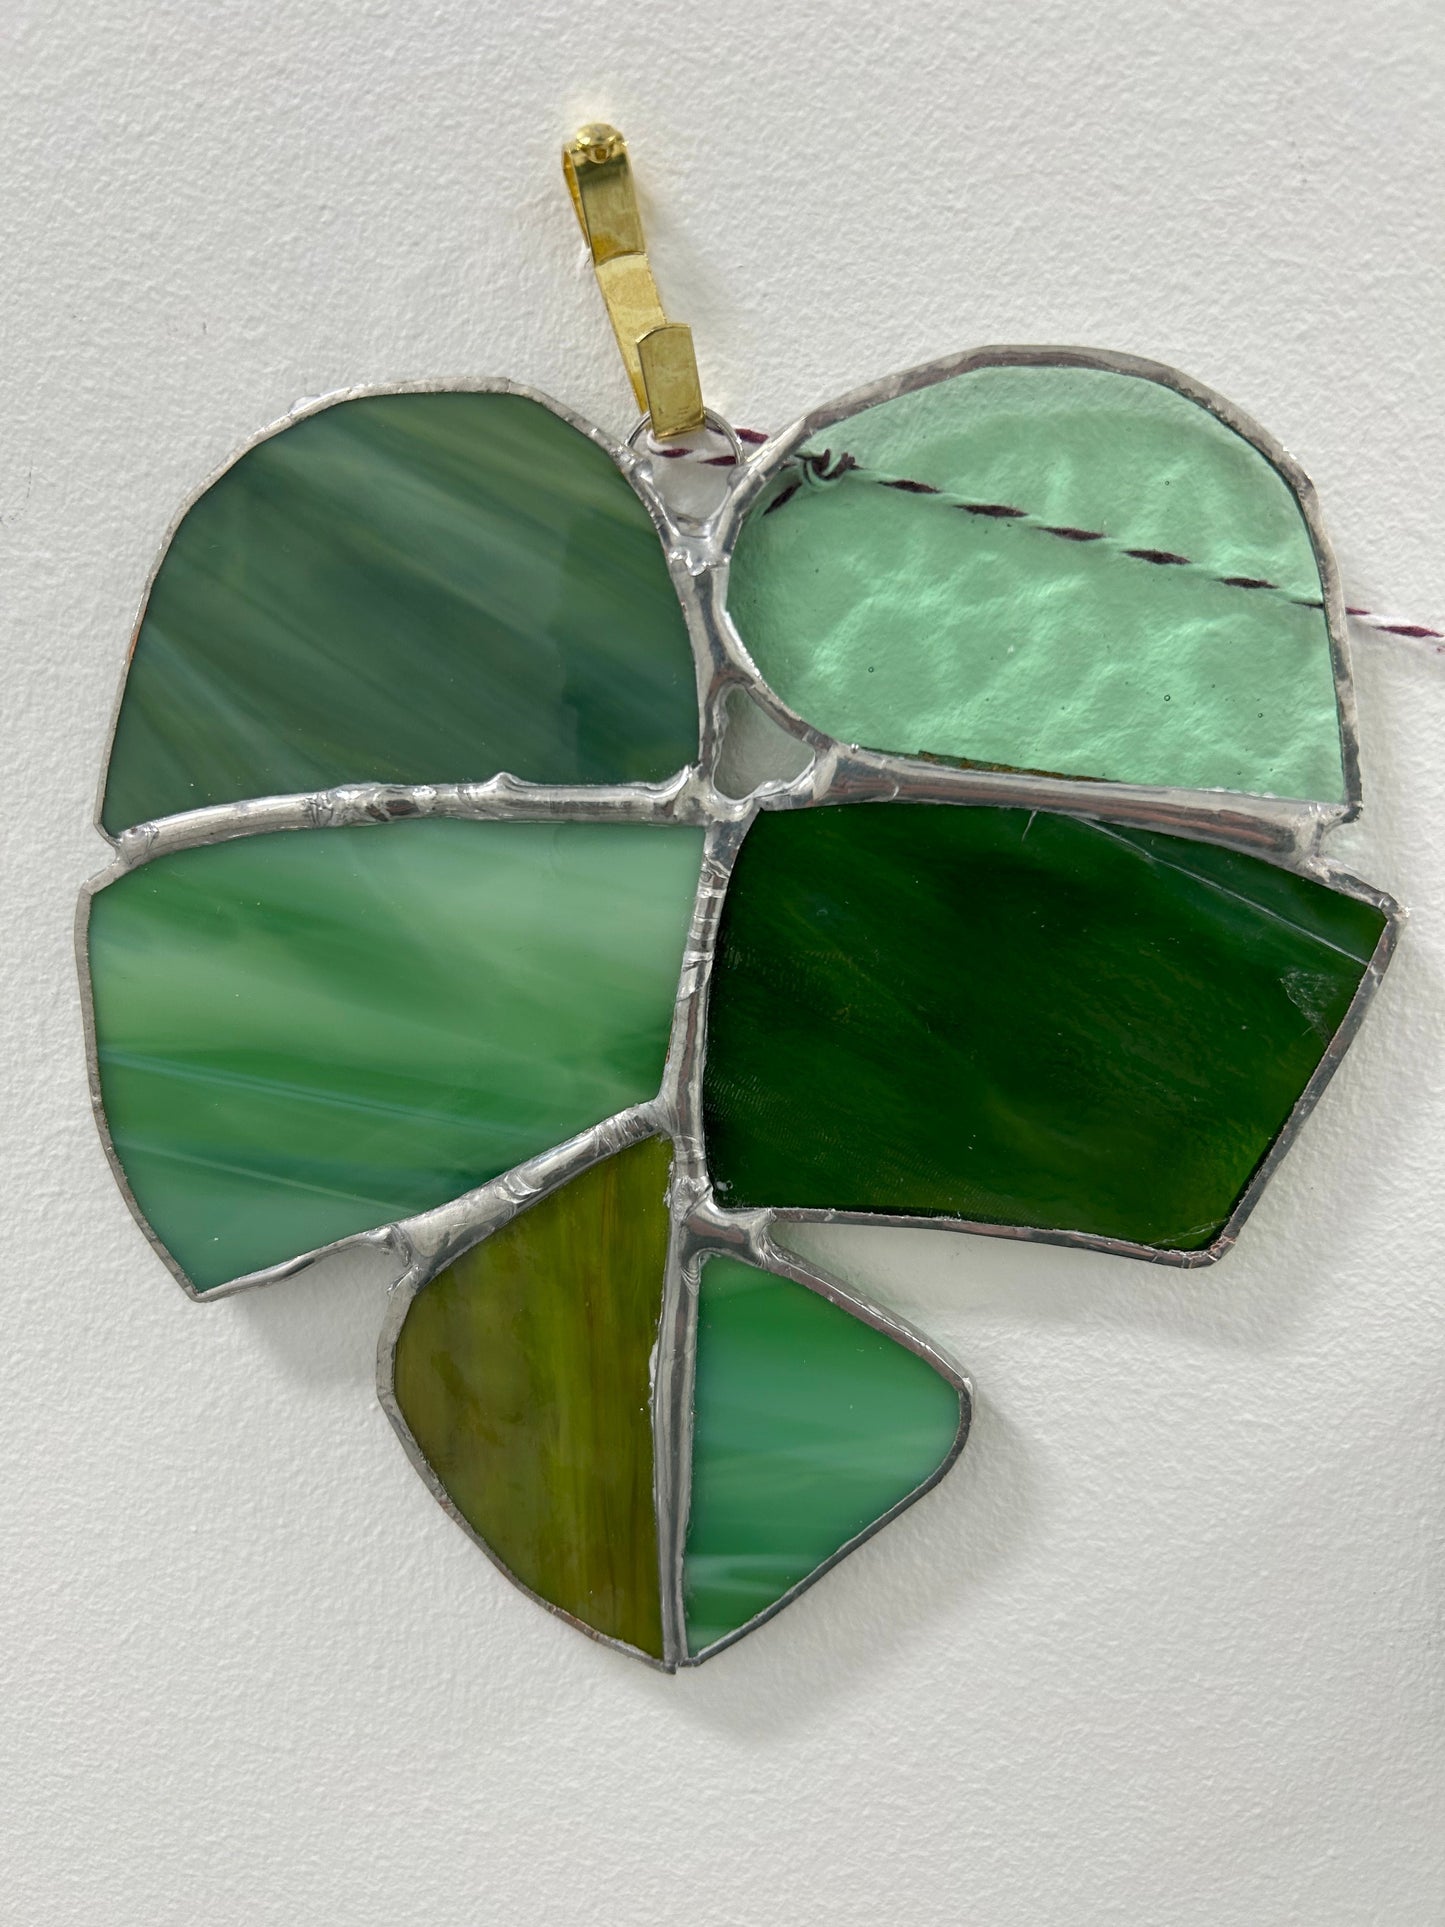 Beginner Stained Glass class, April 4, 4-6:30 pm